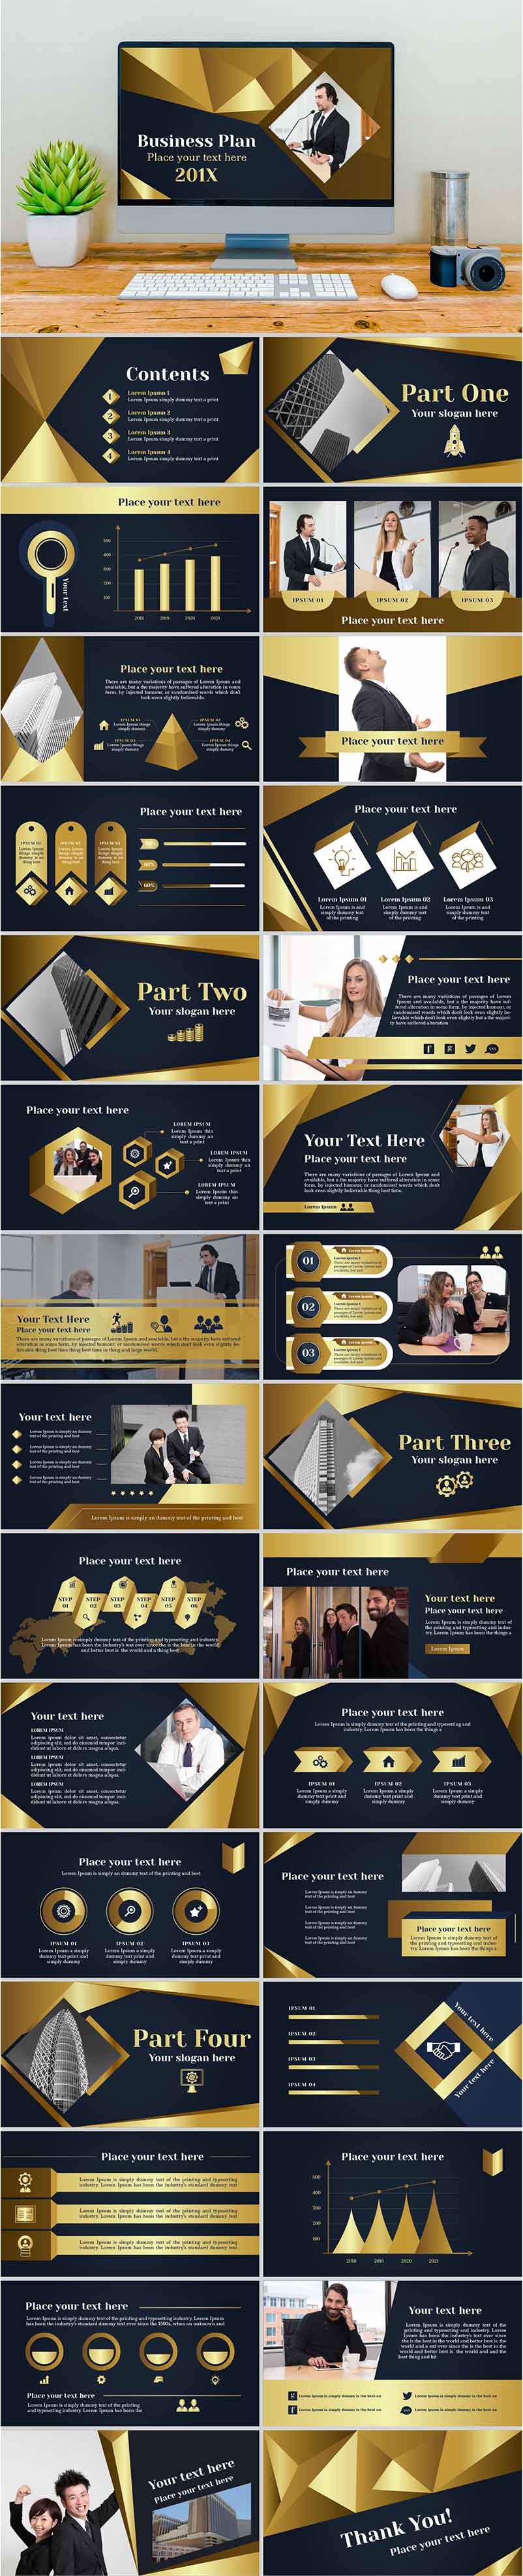 PowerPoint template vol.45